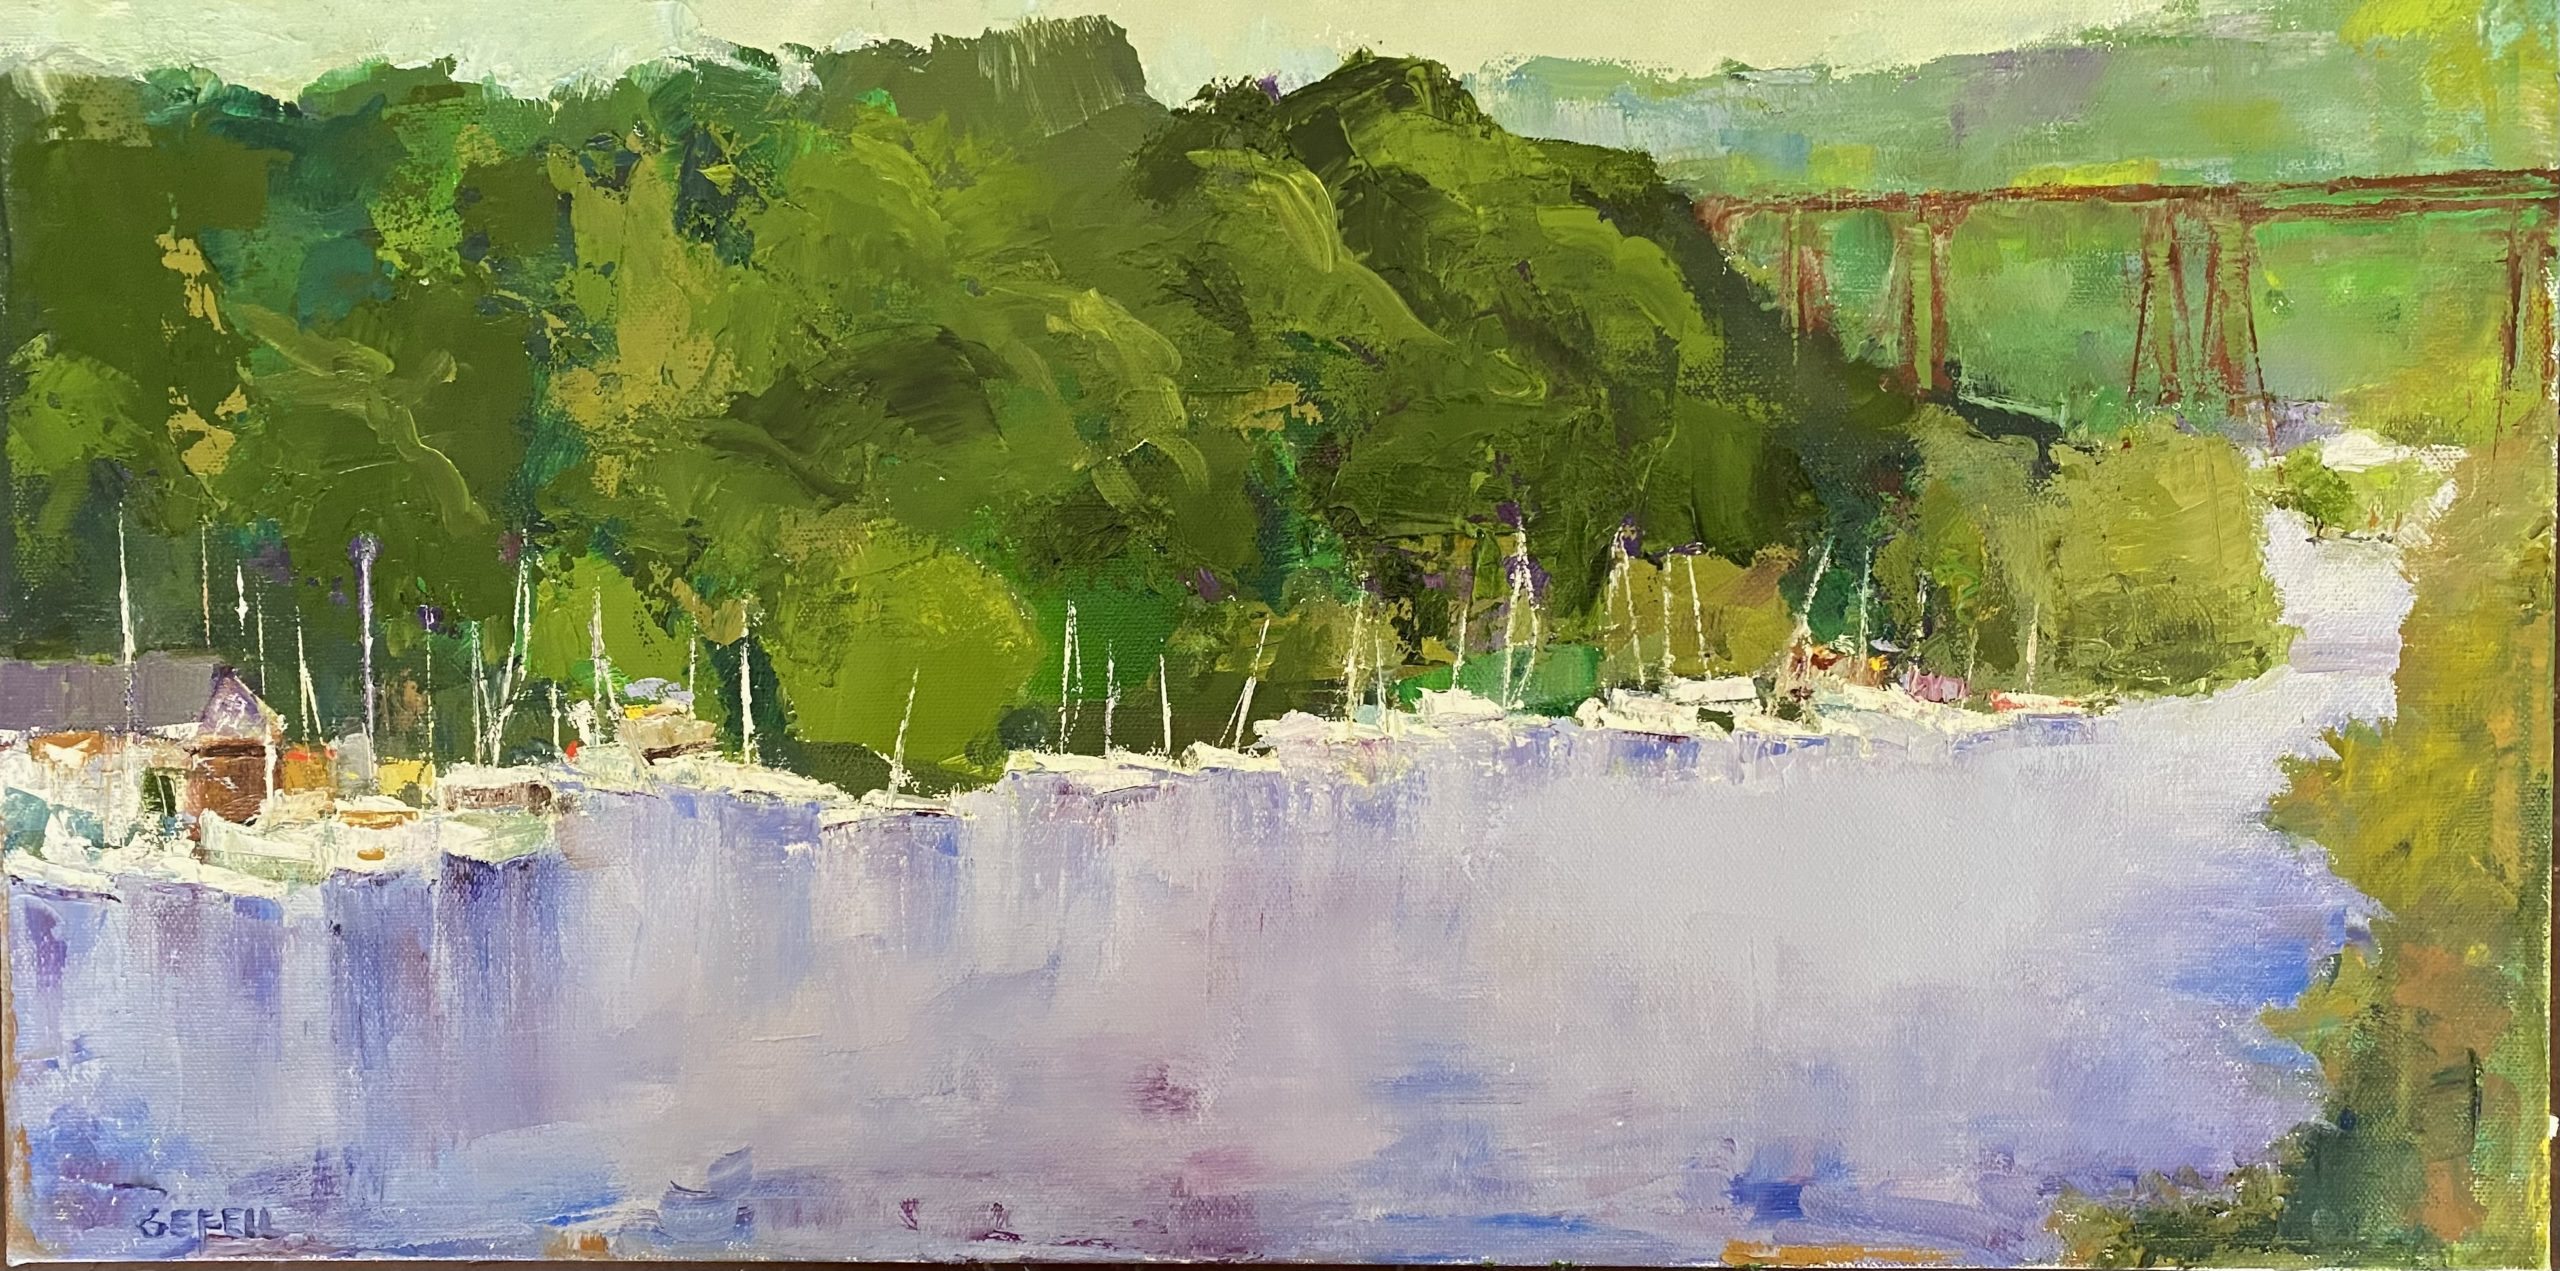 River Boats (oil on canvas) by artist Kathleen Gefell